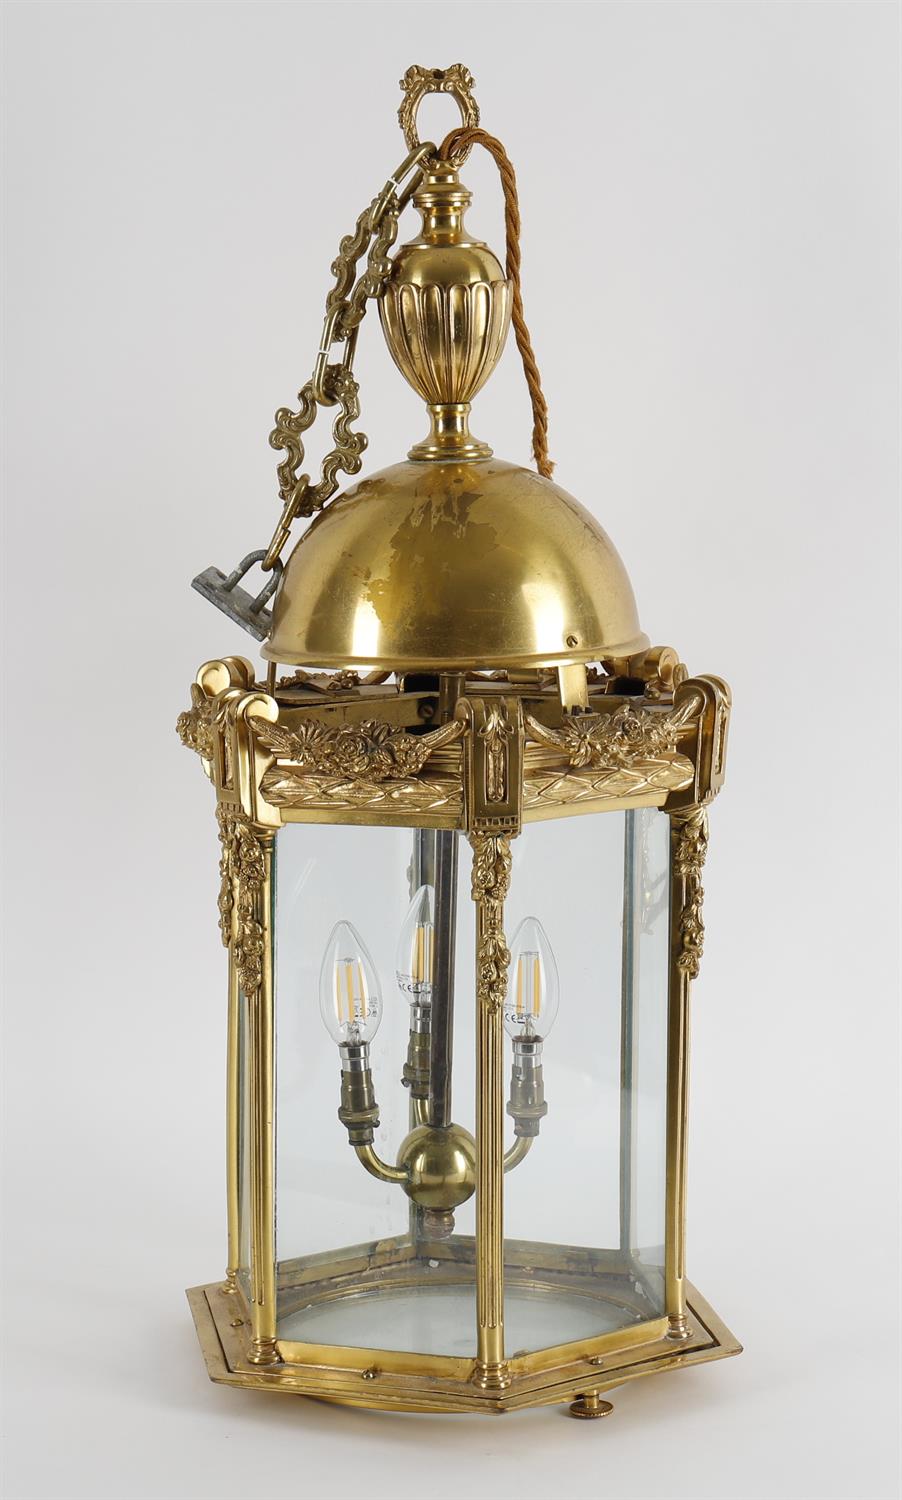 A gilt metal six glass hall lantern in the late 18th century French style - Image 4 of 4